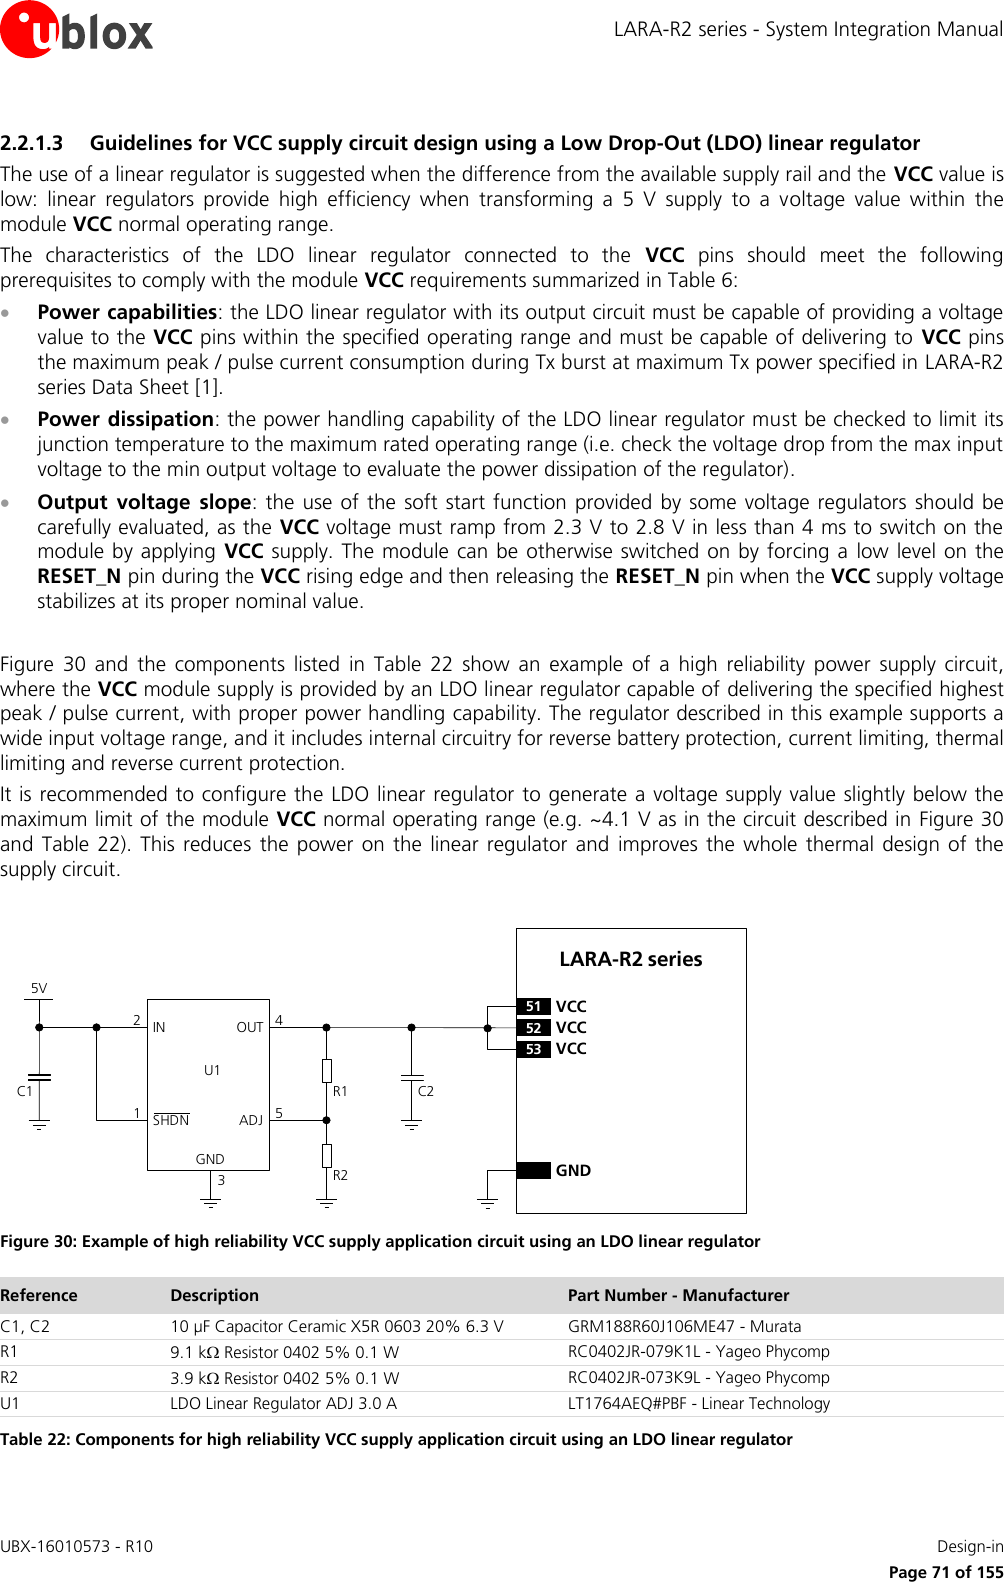 LARA-R2 series - System Integration Manual UBX-16010573 - R10    Design-in     Page 71 of 155 2.2.1.3 Guidelines for VCC supply circuit design using a Low Drop-Out (LDO) linear regulator The use of a linear regulator is suggested when the difference from the available supply rail and the VCC value is low:  linear  regulators  provide  high  efficiency  when  transforming  a  5  V  supply  to  a  voltage  value  within  the module VCC normal operating range. The  characteristics  of  the  LDO  linear  regulator  connected  to  the  VCC  pins  should  meet  the  following prerequisites to comply with the module VCC requirements summarized in Table 6:  Power capabilities: the LDO linear regulator with its output circuit must be capable of providing a voltage value to the VCC pins within the specified operating range and must be capable of delivering to  VCC pins the maximum peak / pulse current consumption during Tx burst at maximum Tx power specified in LARA-R2 series Data Sheet [1].  Power dissipation: the power handling capability of the LDO linear regulator must be checked to limit its junction temperature to the maximum rated operating range (i.e. check the voltage drop from the max input voltage to the min output voltage to evaluate the power dissipation of the regulator).  Output  voltage  slope: the  use  of  the soft start function provided  by some voltage  regulators  should be carefully evaluated, as the VCC voltage must ramp from 2.3 V to 2.8 V in less than 4 ms to switch on the module by applying  VCC supply. The module can  be  otherwise switched on by forcing  a  low  level on the RESET_N pin during the VCC rising edge and then releasing the RESET_N pin when the VCC supply voltage stabilizes at its proper nominal value.  Figure  30  and  the  components  listed  in  Table  22  show  an  example  of  a  high  reliability  power  supply  circuit, where the VCC module supply is provided by an LDO linear regulator capable of delivering the specified highest peak / pulse current, with proper power handling capability. The regulator described in this example supports a wide input voltage range, and it includes internal circuitry for reverse battery protection, current limiting, thermal limiting and reverse current protection. It is recommended to configure the LDO linear regulator to generate a voltage supply value slightly below the maximum limit of the module VCC normal operating range (e.g. ~4.1 V as in the circuit described in  Figure 30 and  Table  22).  This reduces  the power  on the  linear regulator  and  improves  the whole  thermal design  of the supply circuit.  5VC1IN OUTADJGND12453C2R1R2U1SHDNLARA-R2 series52 VCC53 VCC51 VCCGND Figure 30: Example of high reliability VCC supply application circuit using an LDO linear regulator Reference Description Part Number - Manufacturer C1, C2 10 µF Capacitor Ceramic X5R 0603 20% 6.3 V GRM188R60J106ME47 - Murata R1 9.1 k Resistor 0402 5% 0.1 W RC0402JR-079K1L - Yageo Phycomp R2 3.9 k Resistor 0402 5% 0.1 W RC0402JR-073K9L - Yageo Phycomp U1 LDO Linear Regulator ADJ 3.0 A LT1764AEQ#PBF - Linear Technology Table 22: Components for high reliability VCC supply application circuit using an LDO linear regulator 